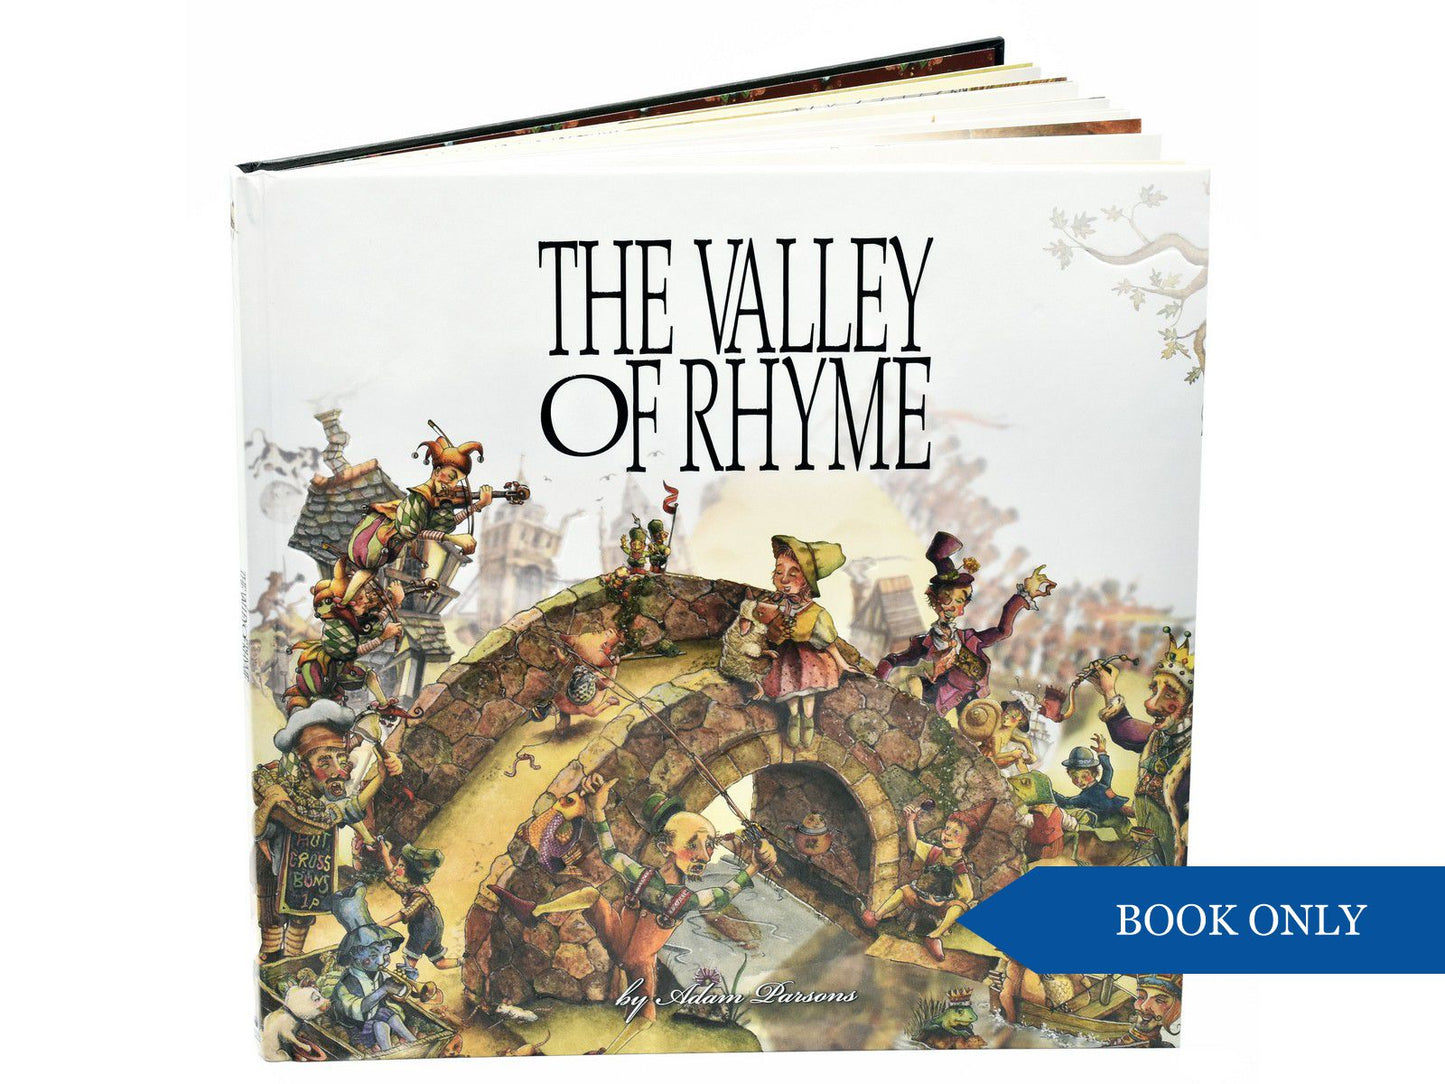 The cover of the book, The Valley of Rhyme.